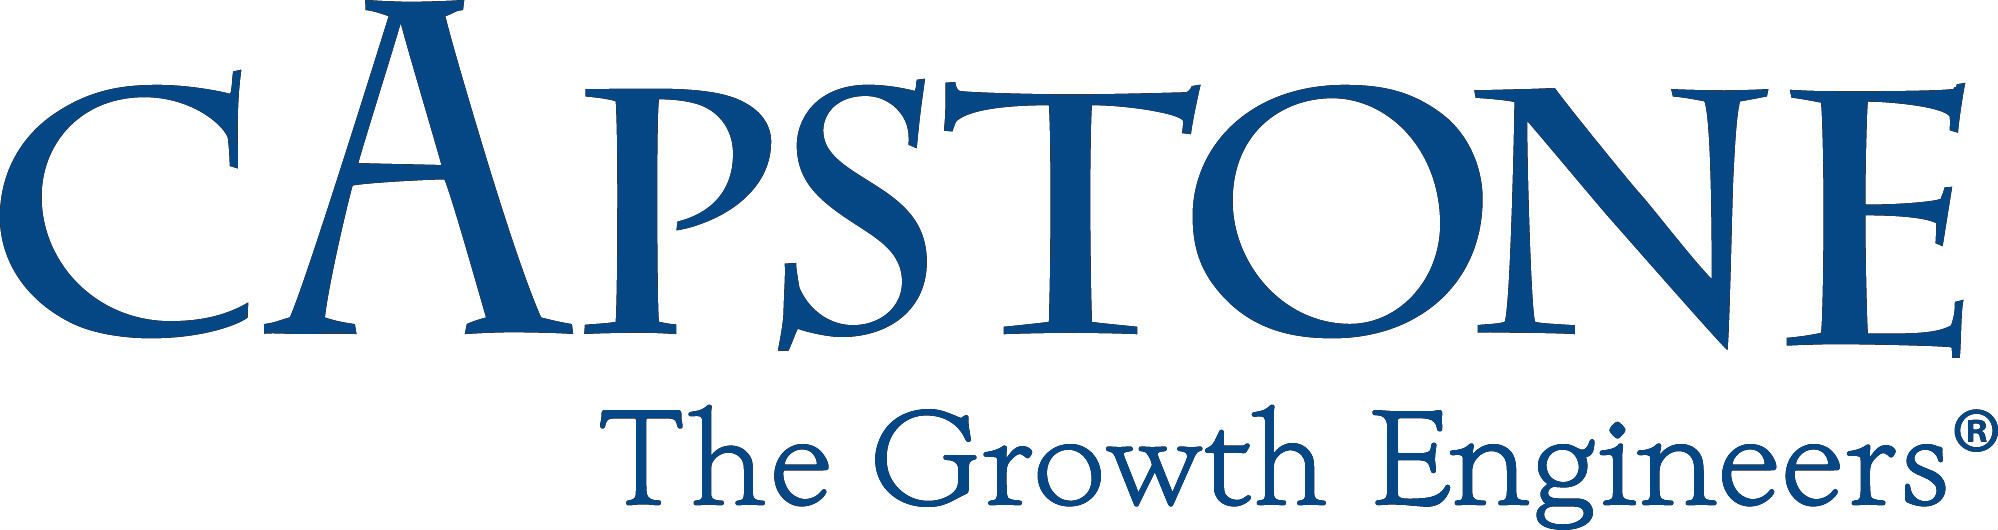 Capstone is a management consulting firm located outside of Washington DC specializing in corporate growth strategies, primarily Mergers & Acquisitions